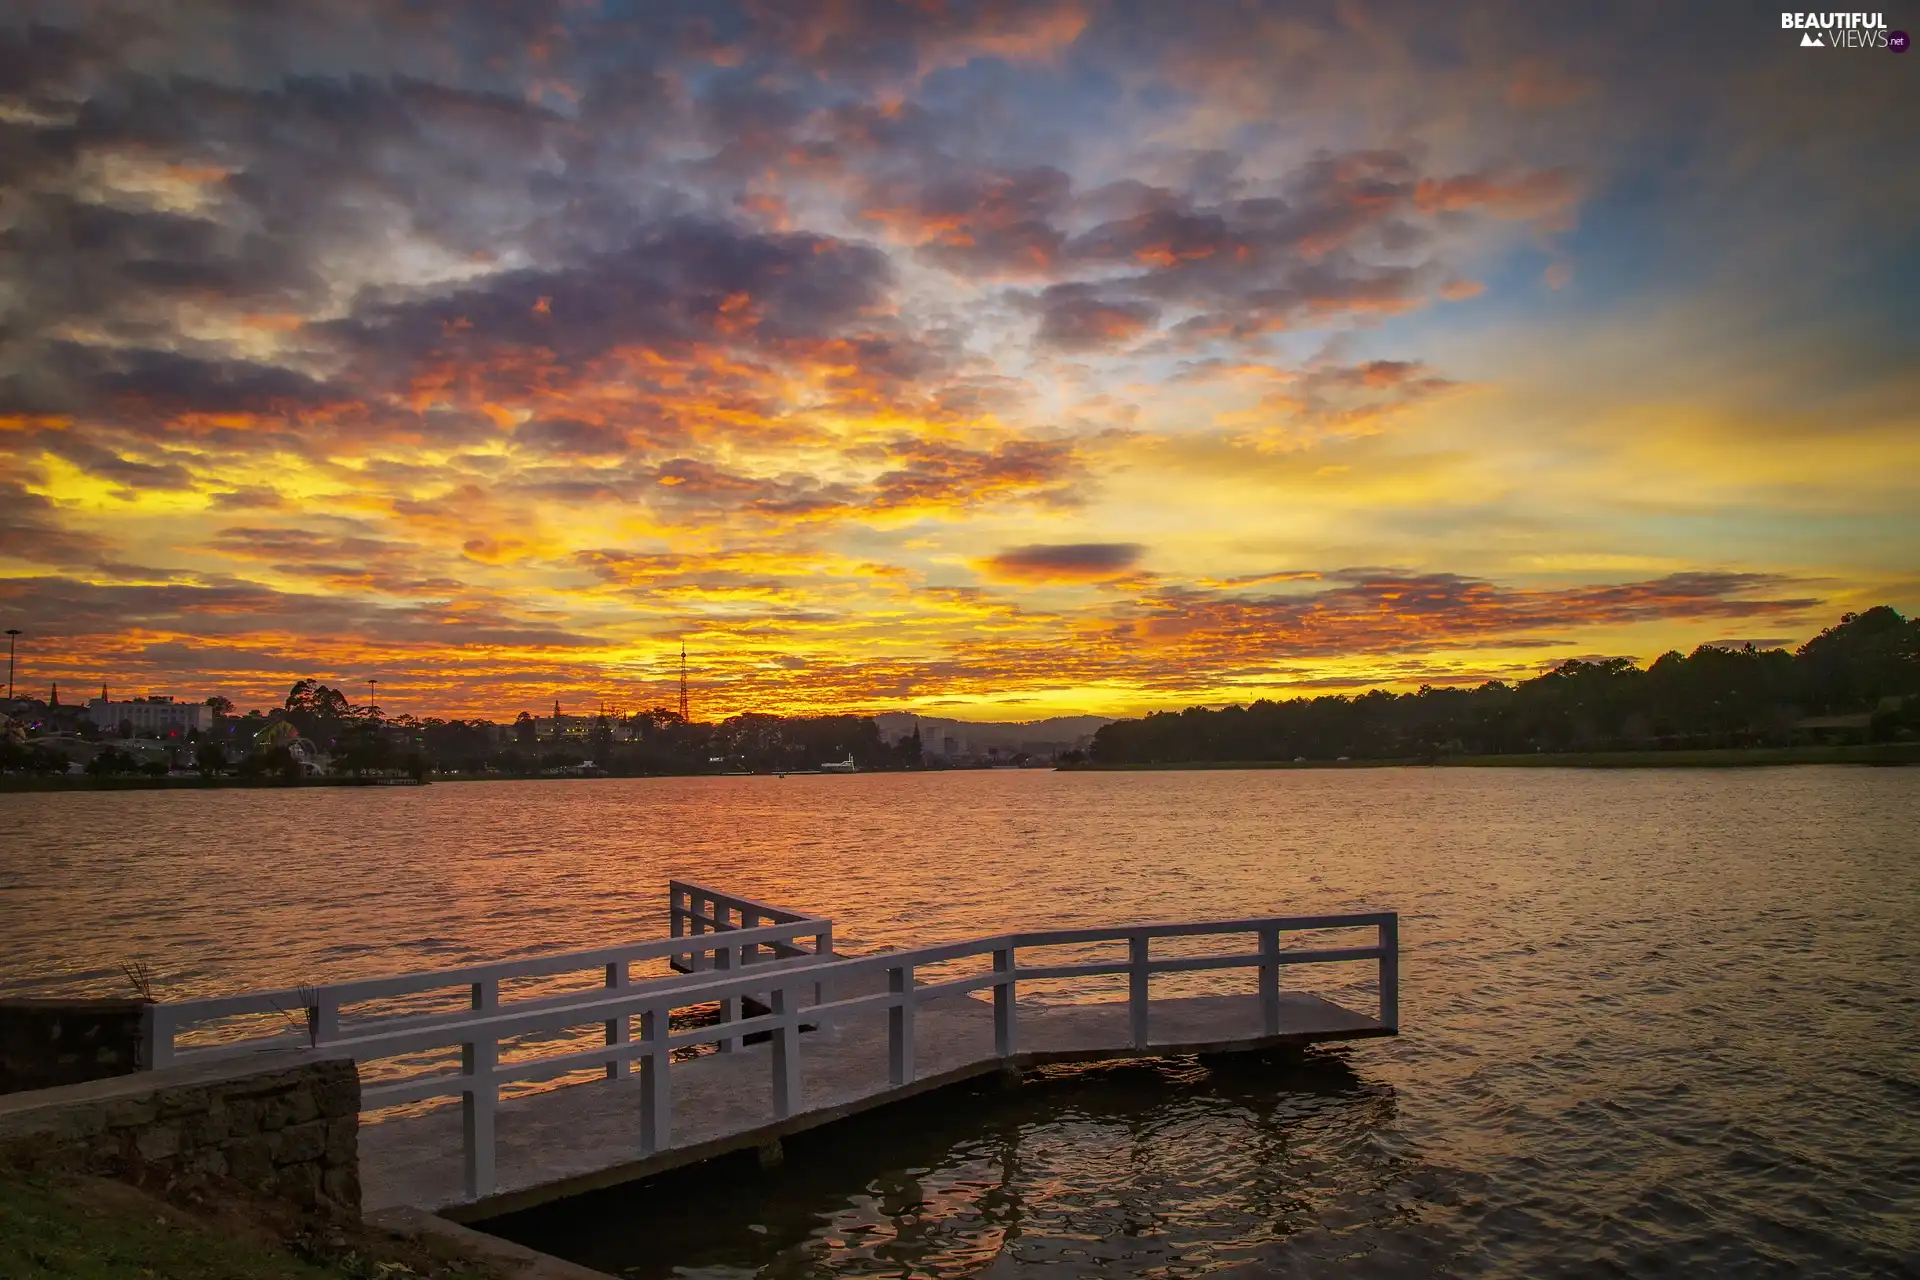 clouds, lake, viewes, Great Sunsets, Platform, trees, Town